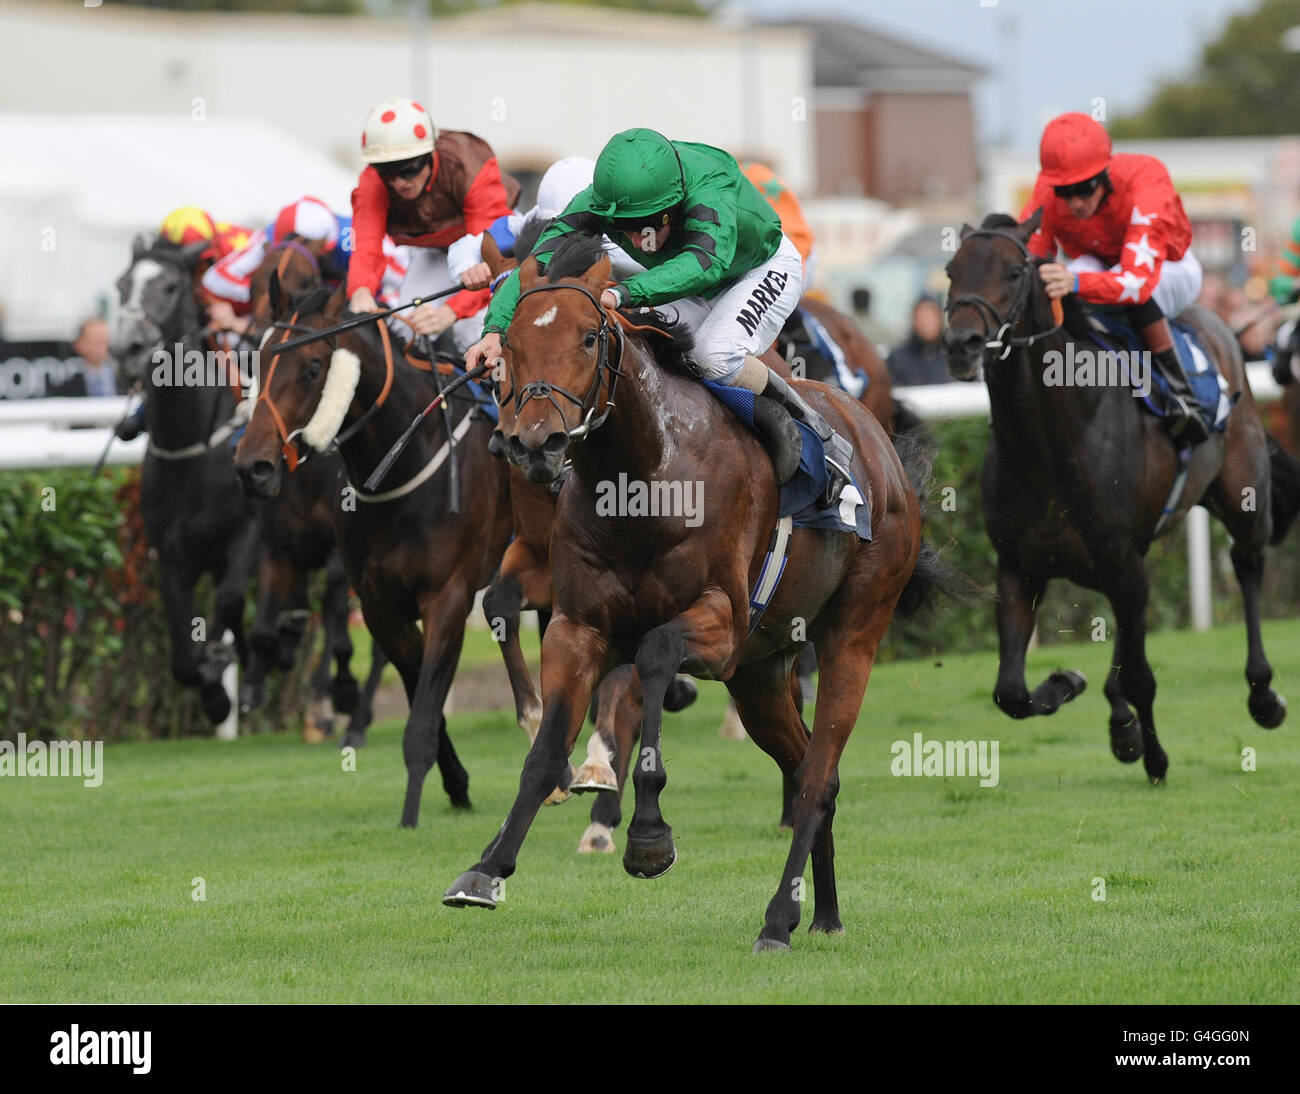 Ghostwriting and William Buick win the Arena Structures Nursery Handicap during the Welcome to Yorkshire St Ledger Festival Opening Day at Doncaster Racecourse, Doncaster. Stock Photo